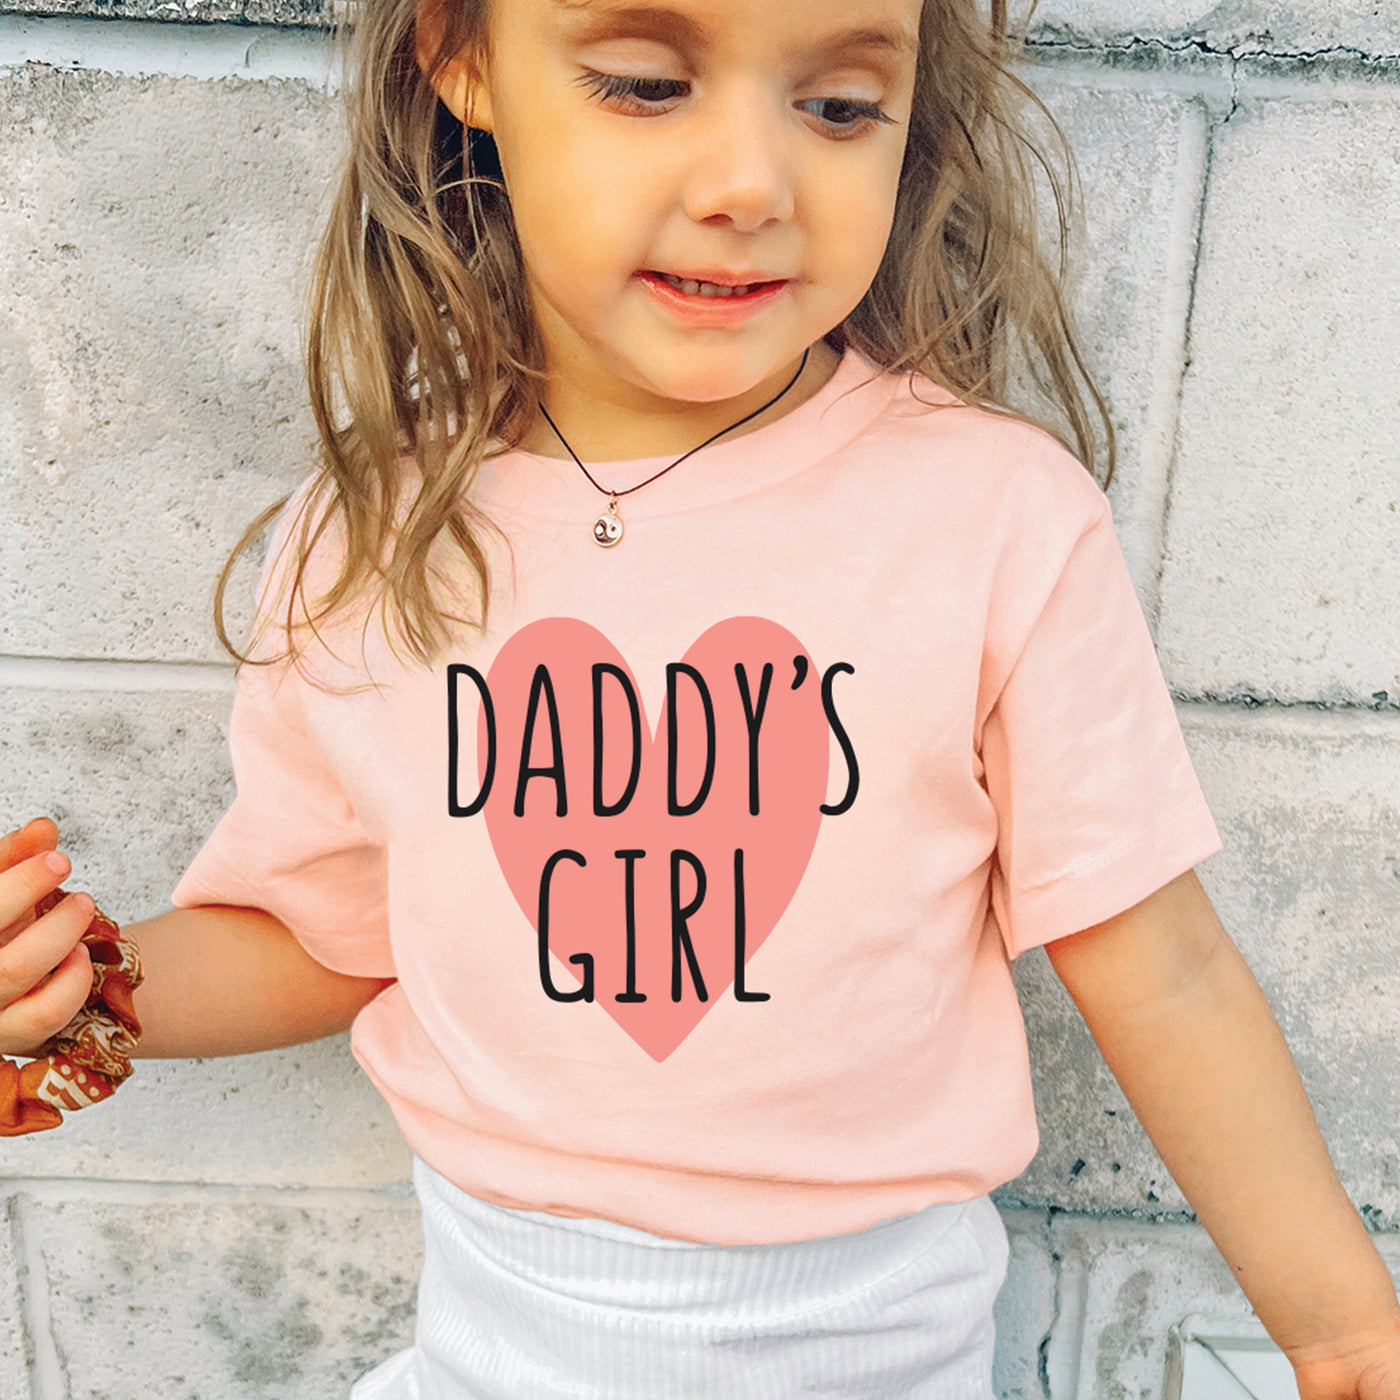 cute little girl wearing heather peach tshirt with pink and black DADDY'S GIRL print inside big heart print